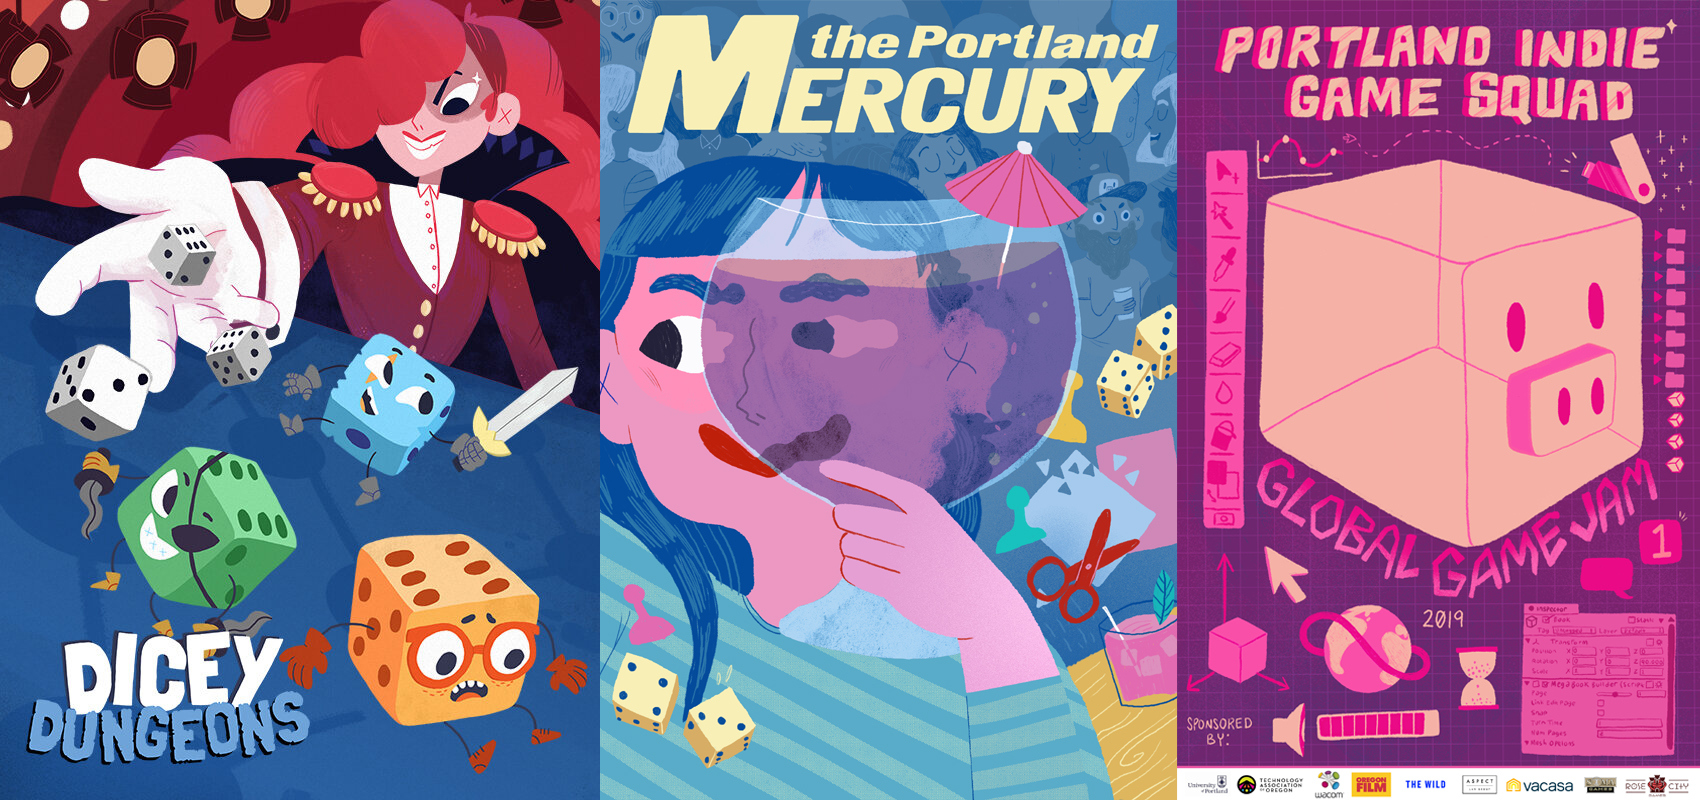 left: dicey dungeons illustration, center: Portland Mercury cover, right: Portland Indie Gamesquad poster